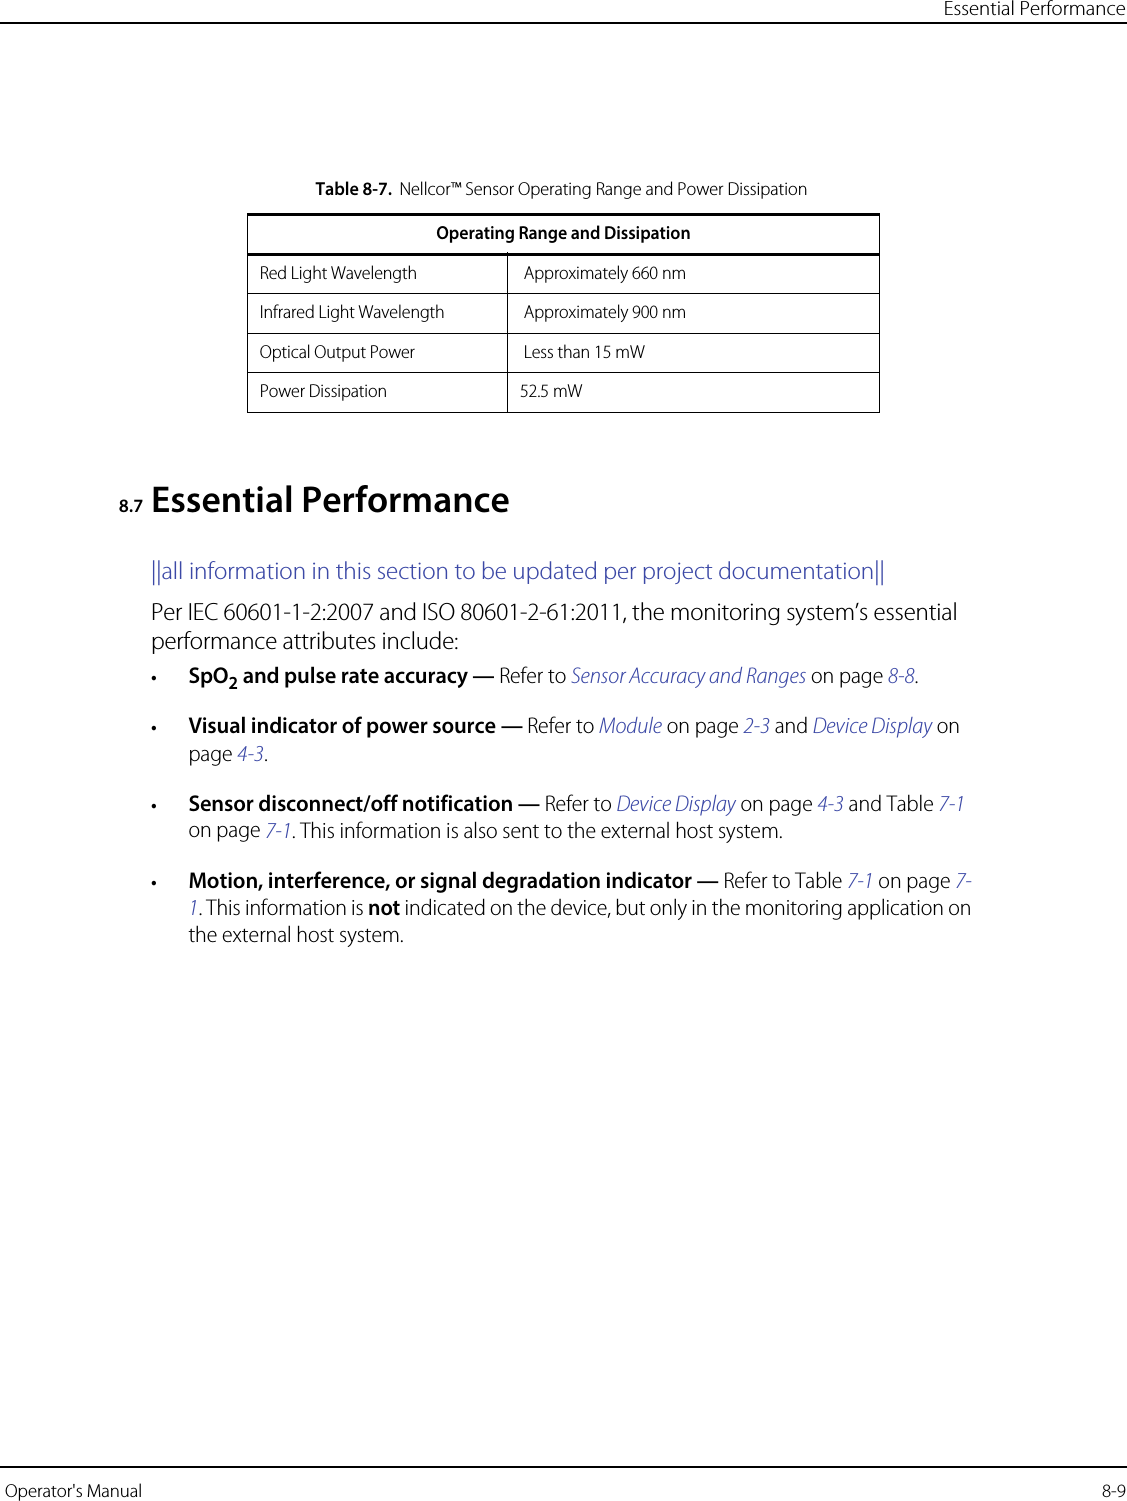 Essential Performance Operator&apos;s Manual  8-98.7 Essential Performance||all information in this section to be updated per project documentation||Per IEC 60601-1-2:2007 and ISO 80601-2-61:2011, the monitoring system’s essential performance attributes include:•SpO2 and pulse rate accuracy — Refer to Sensor Accuracy and Ranges on page 8-8.•Visual indicator of power source — Refer to Module on page 2-3 and Device Display on page 4-3.•Sensor disconnect/off notification — Refer to Device Display on page 4-3 and Table 7-1 on page 7-1. This information is also sent to the external host system.•Motion, interference, or signal degradation indicator — Refer to Table 7-1 on page 7-1. This information is not indicated on the device, but only in the monitoring application on the external host system.Table8-7.Nellcor™ Sensor Operating Range and Power DissipationOperating Range and DissipationRed Light Wavelength  Approximately 660 nm Infrared Light Wavelength  Approximately 900 nmOptical Output Power  Less than 15 mWPower Dissipation 52.5 mW